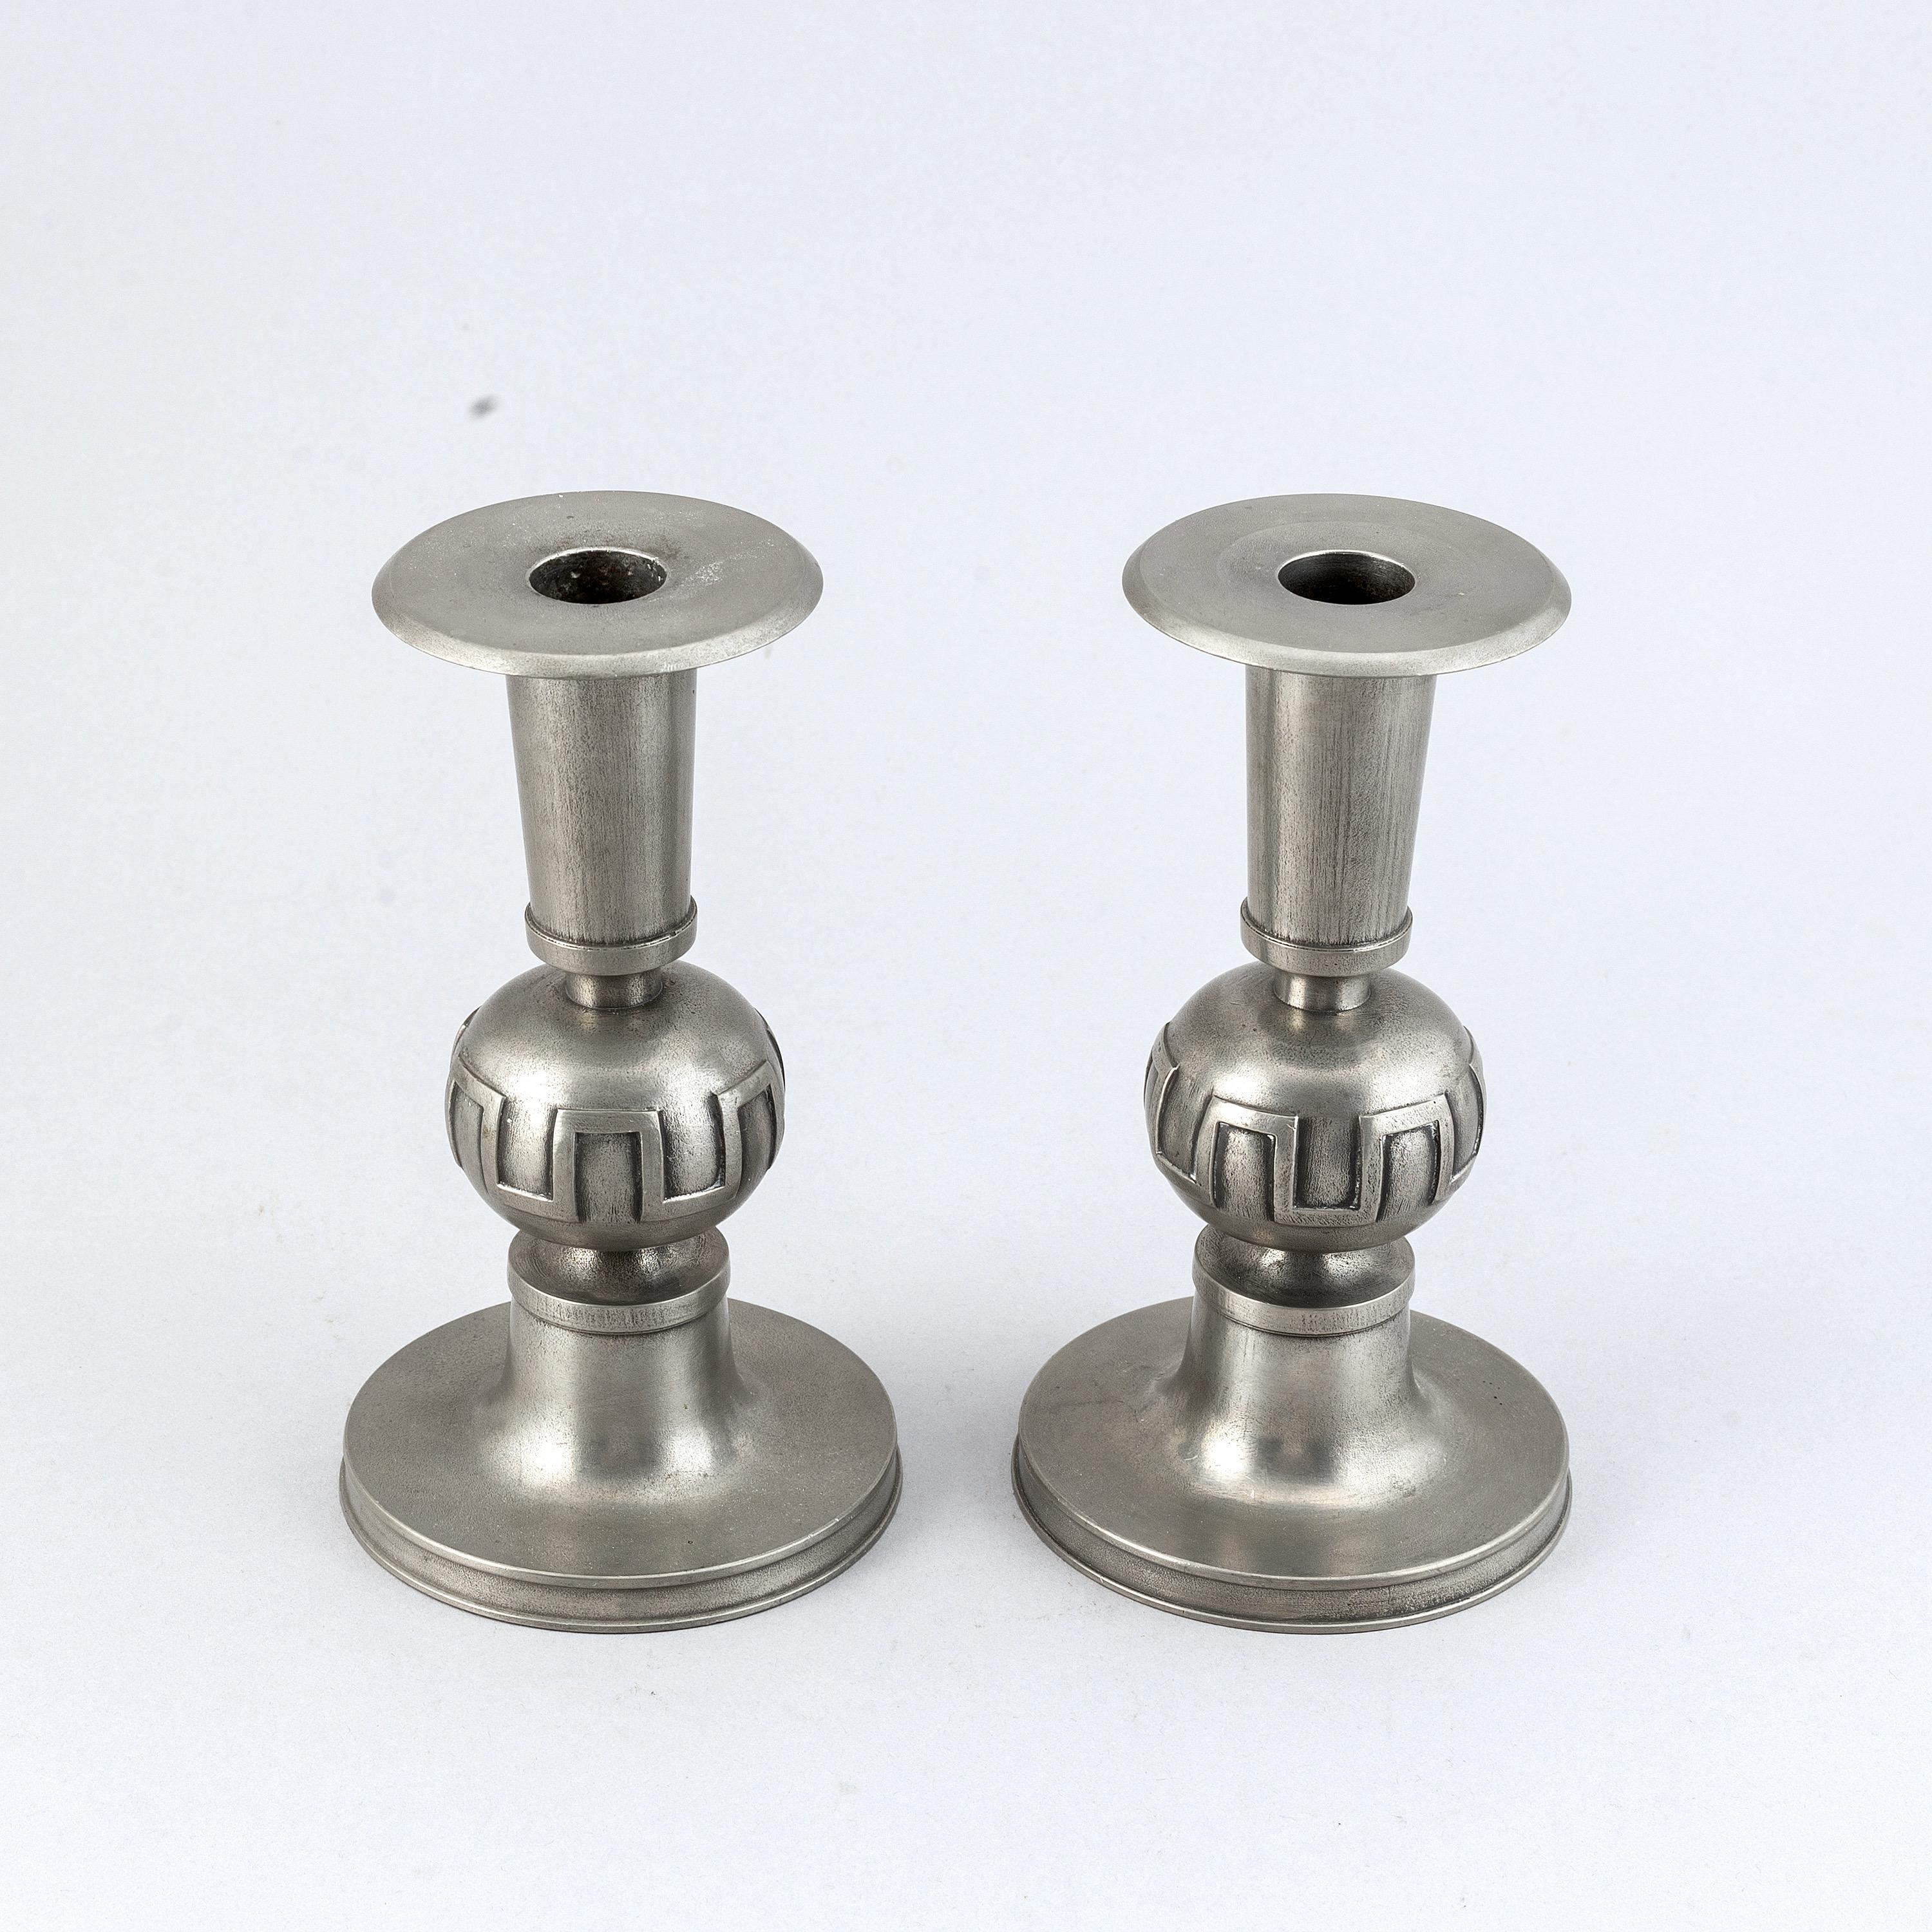 A fine good size pair of Swedish Modern pewter candlesticks designed by Edwin Ollers (1888-1959)
Signed Edwin Ollers with mark and dated 1952. They give a heavy impression and look bigger in real life than the dimensions might give.